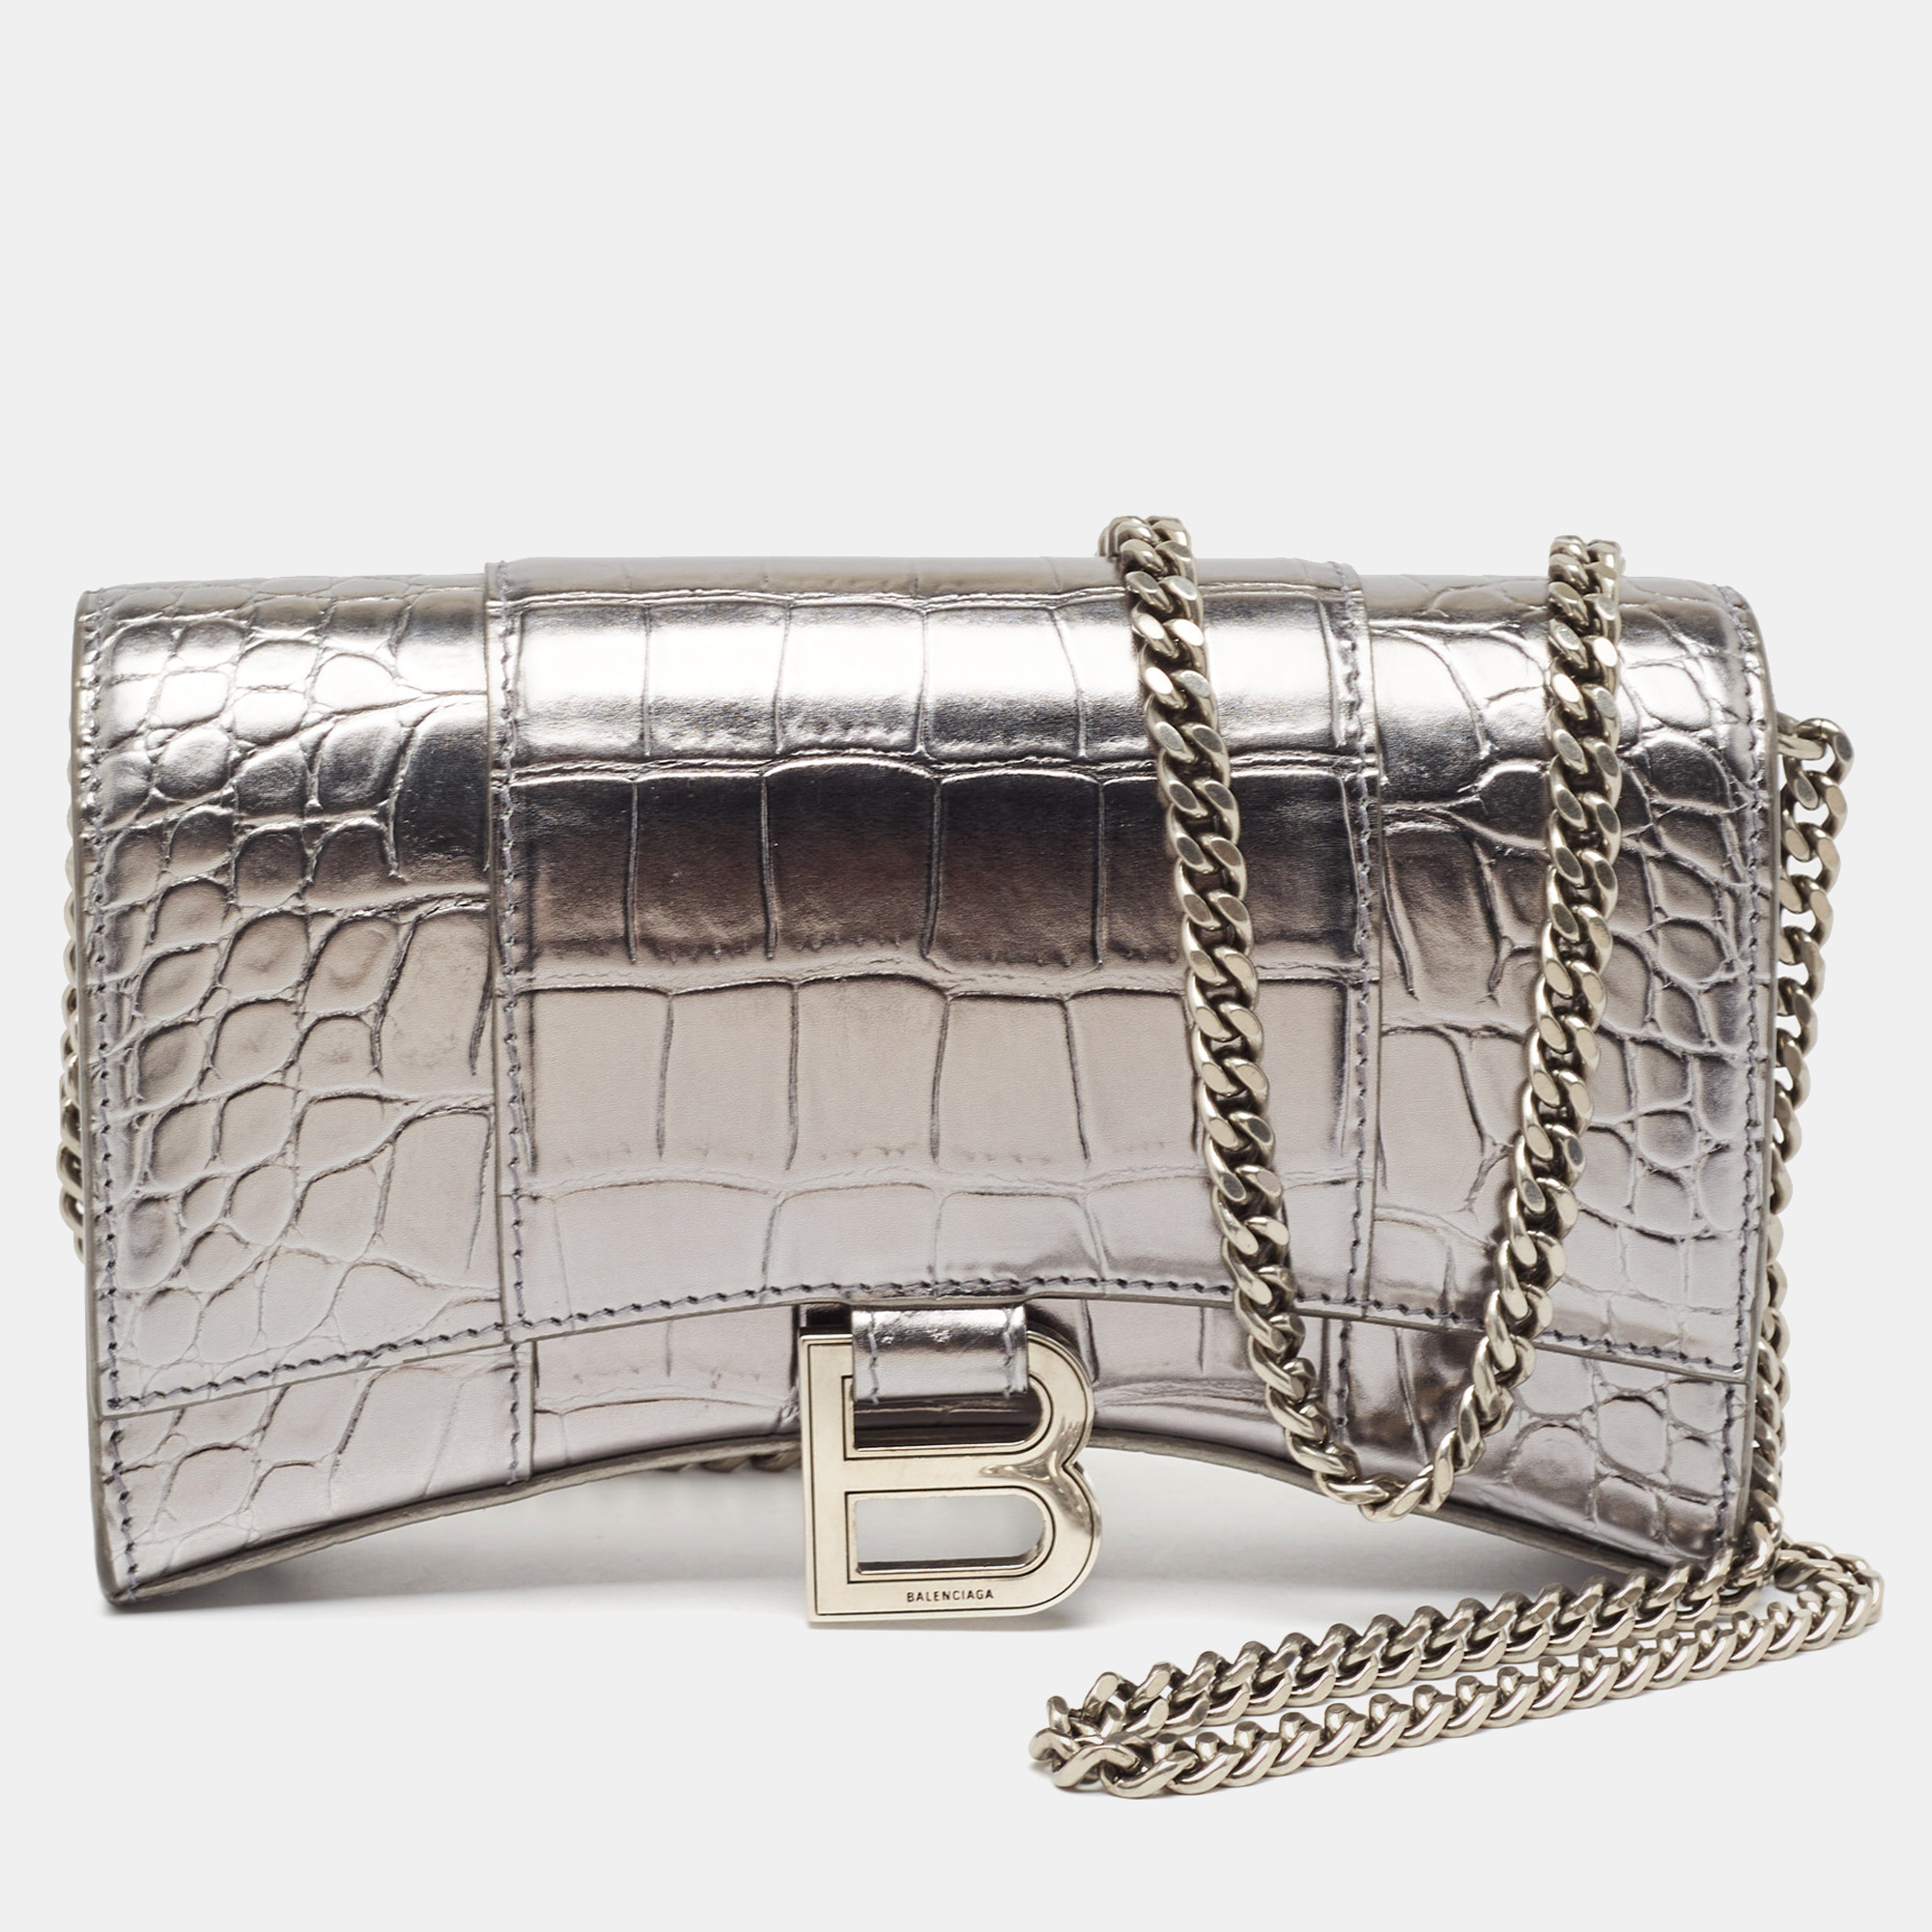 Balenciaga silver croc embossed leather hourglass wallet on chain